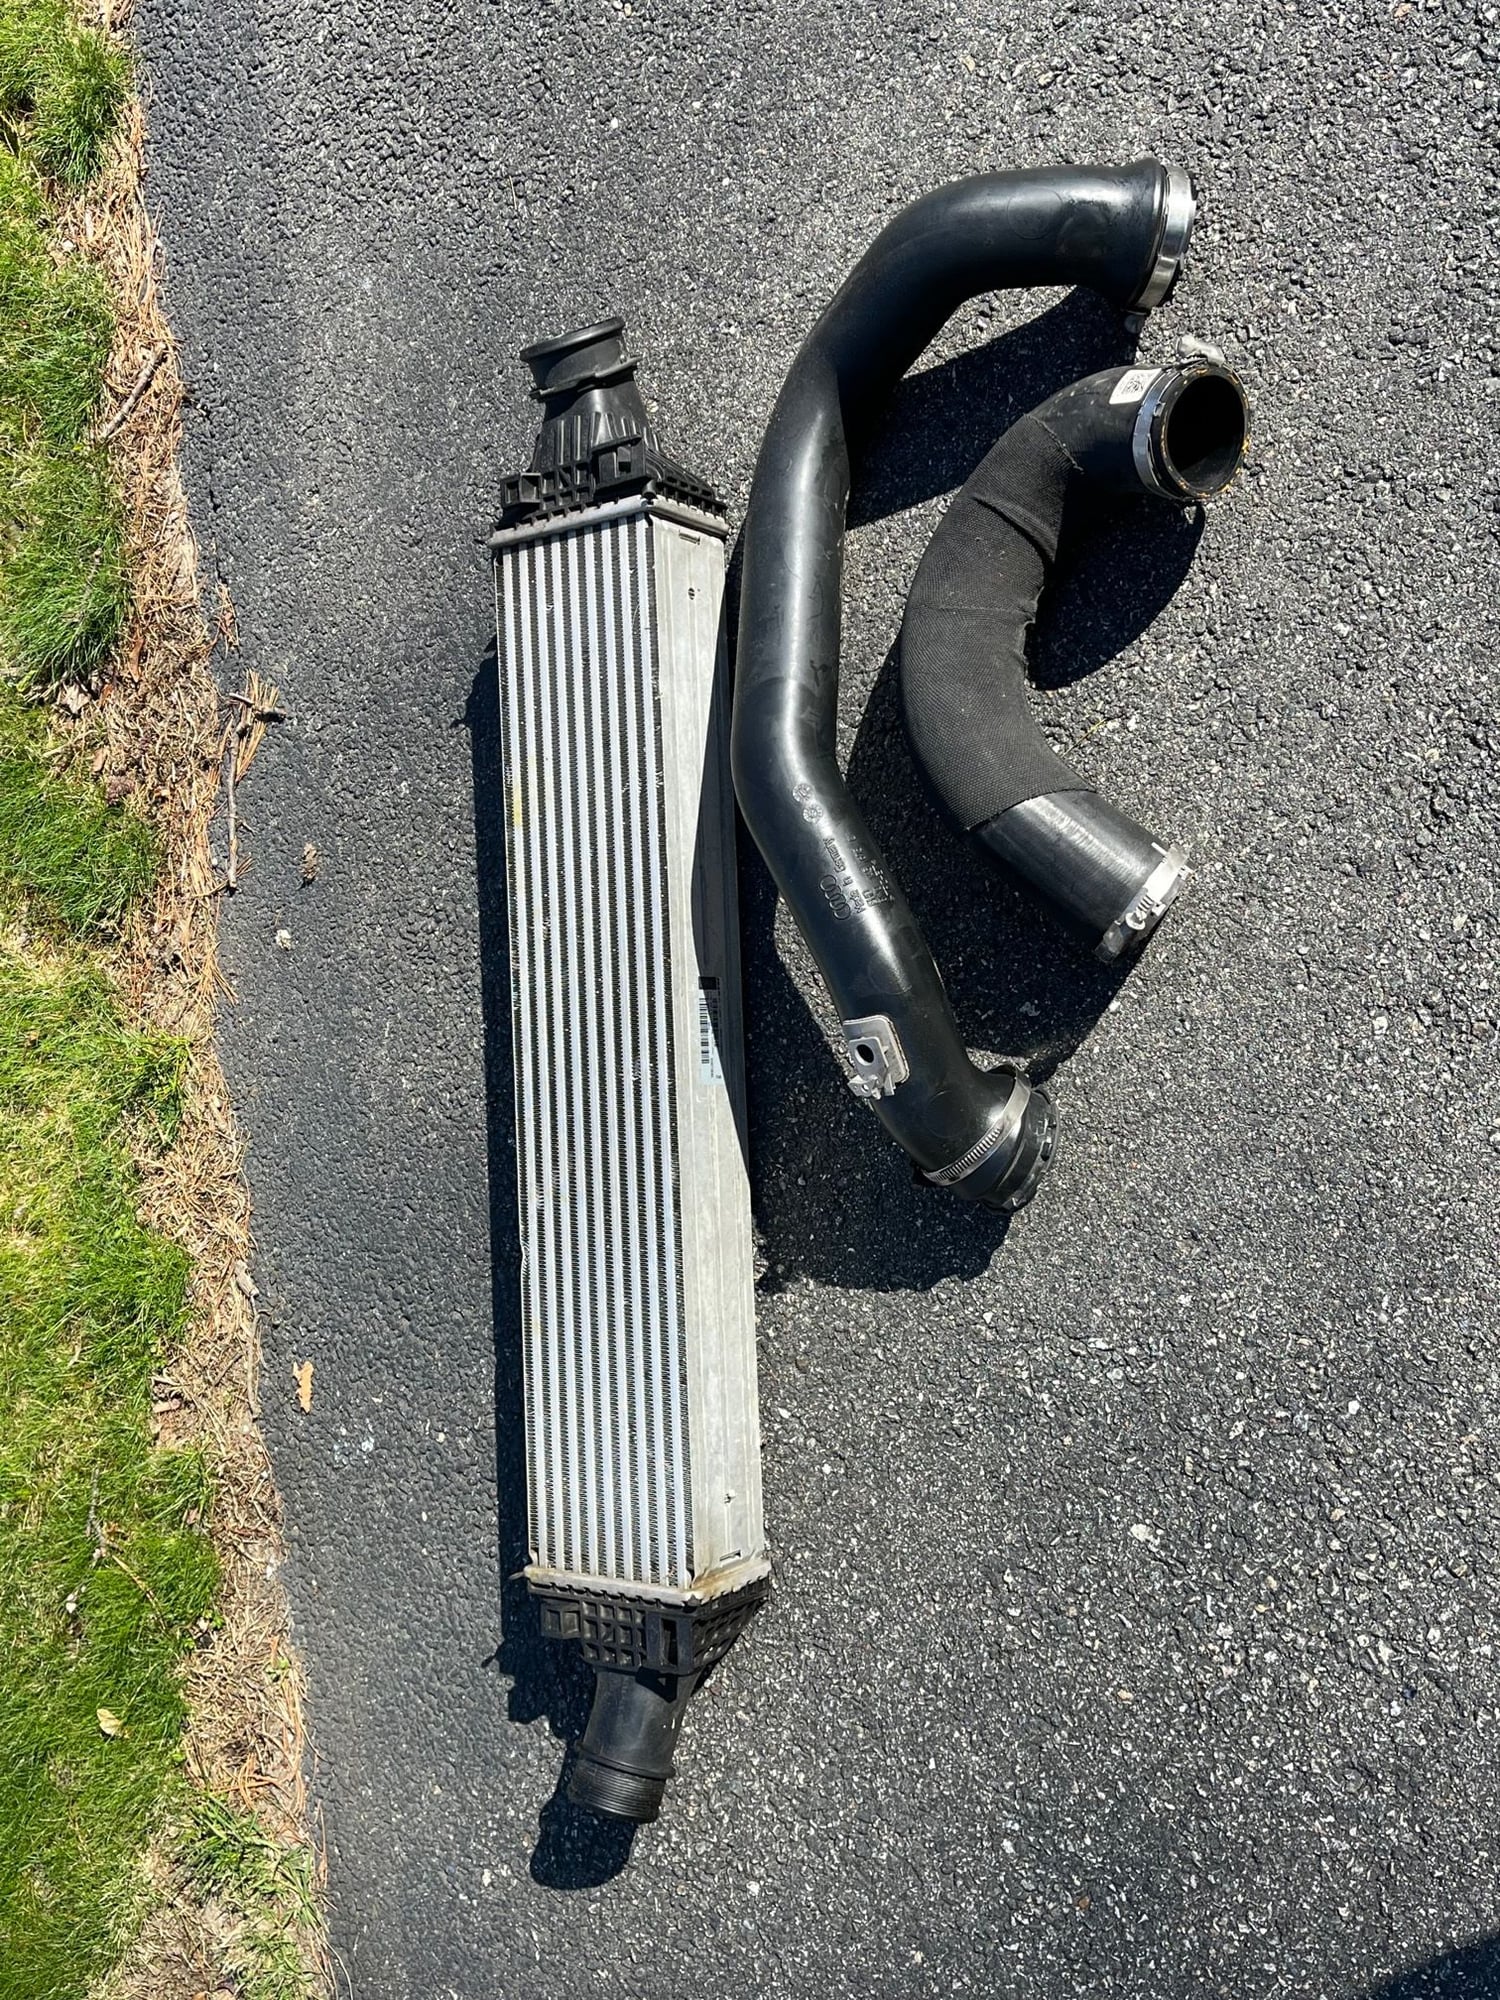 Engine - Intake/Fuel - OEM Intercooler and Hoses from 2018 Audi S4 (Part #8W0145805C) - Used - All Years  All Models - Wilmington, MA 01887, United States